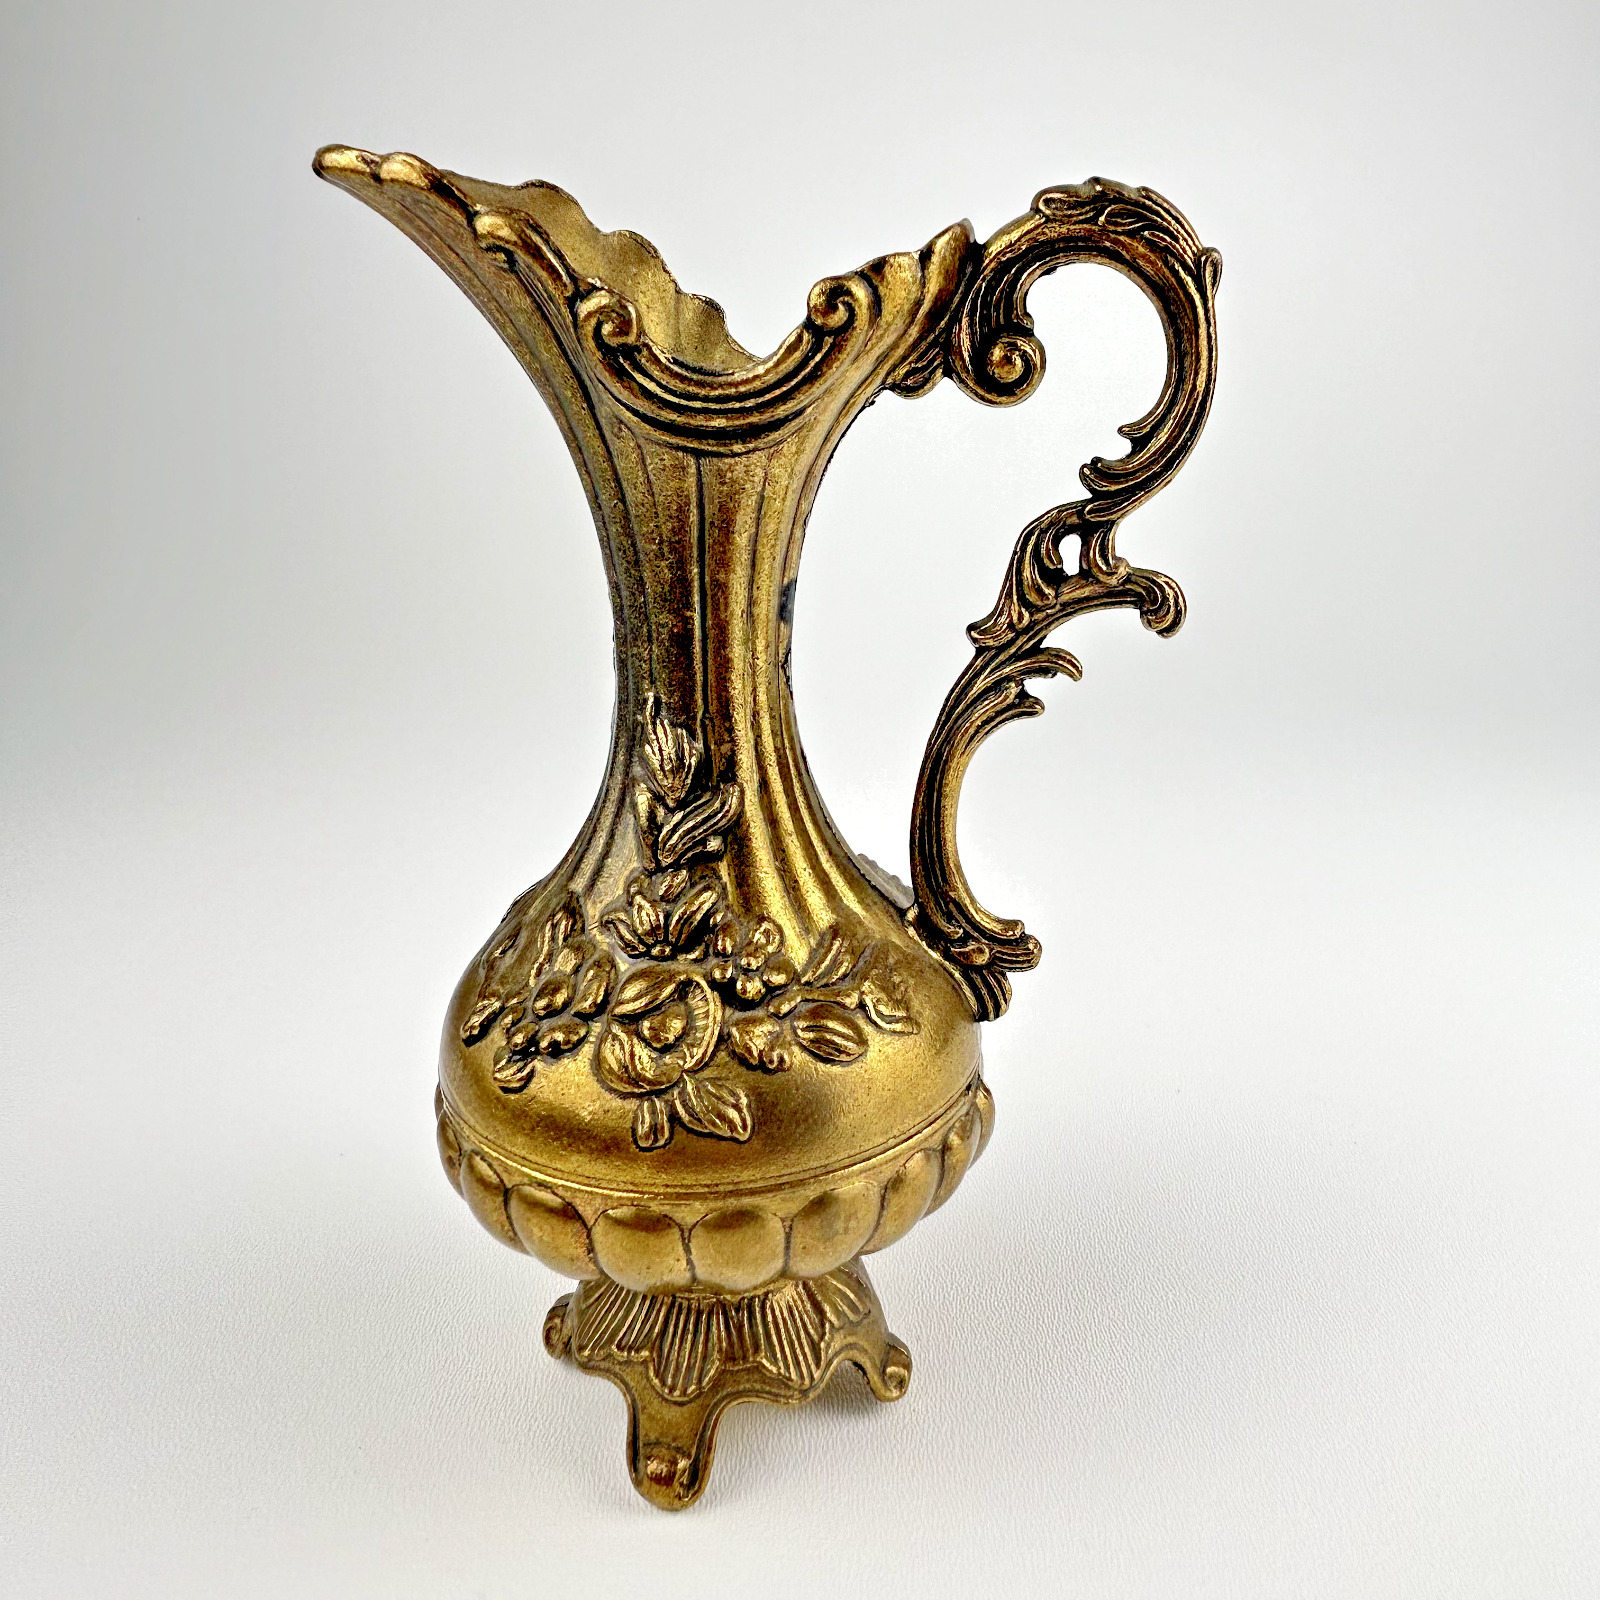 Vintage Ornate Brass Pitcher 7”Tall Floral Design Footed Bud Vase Made In Italy